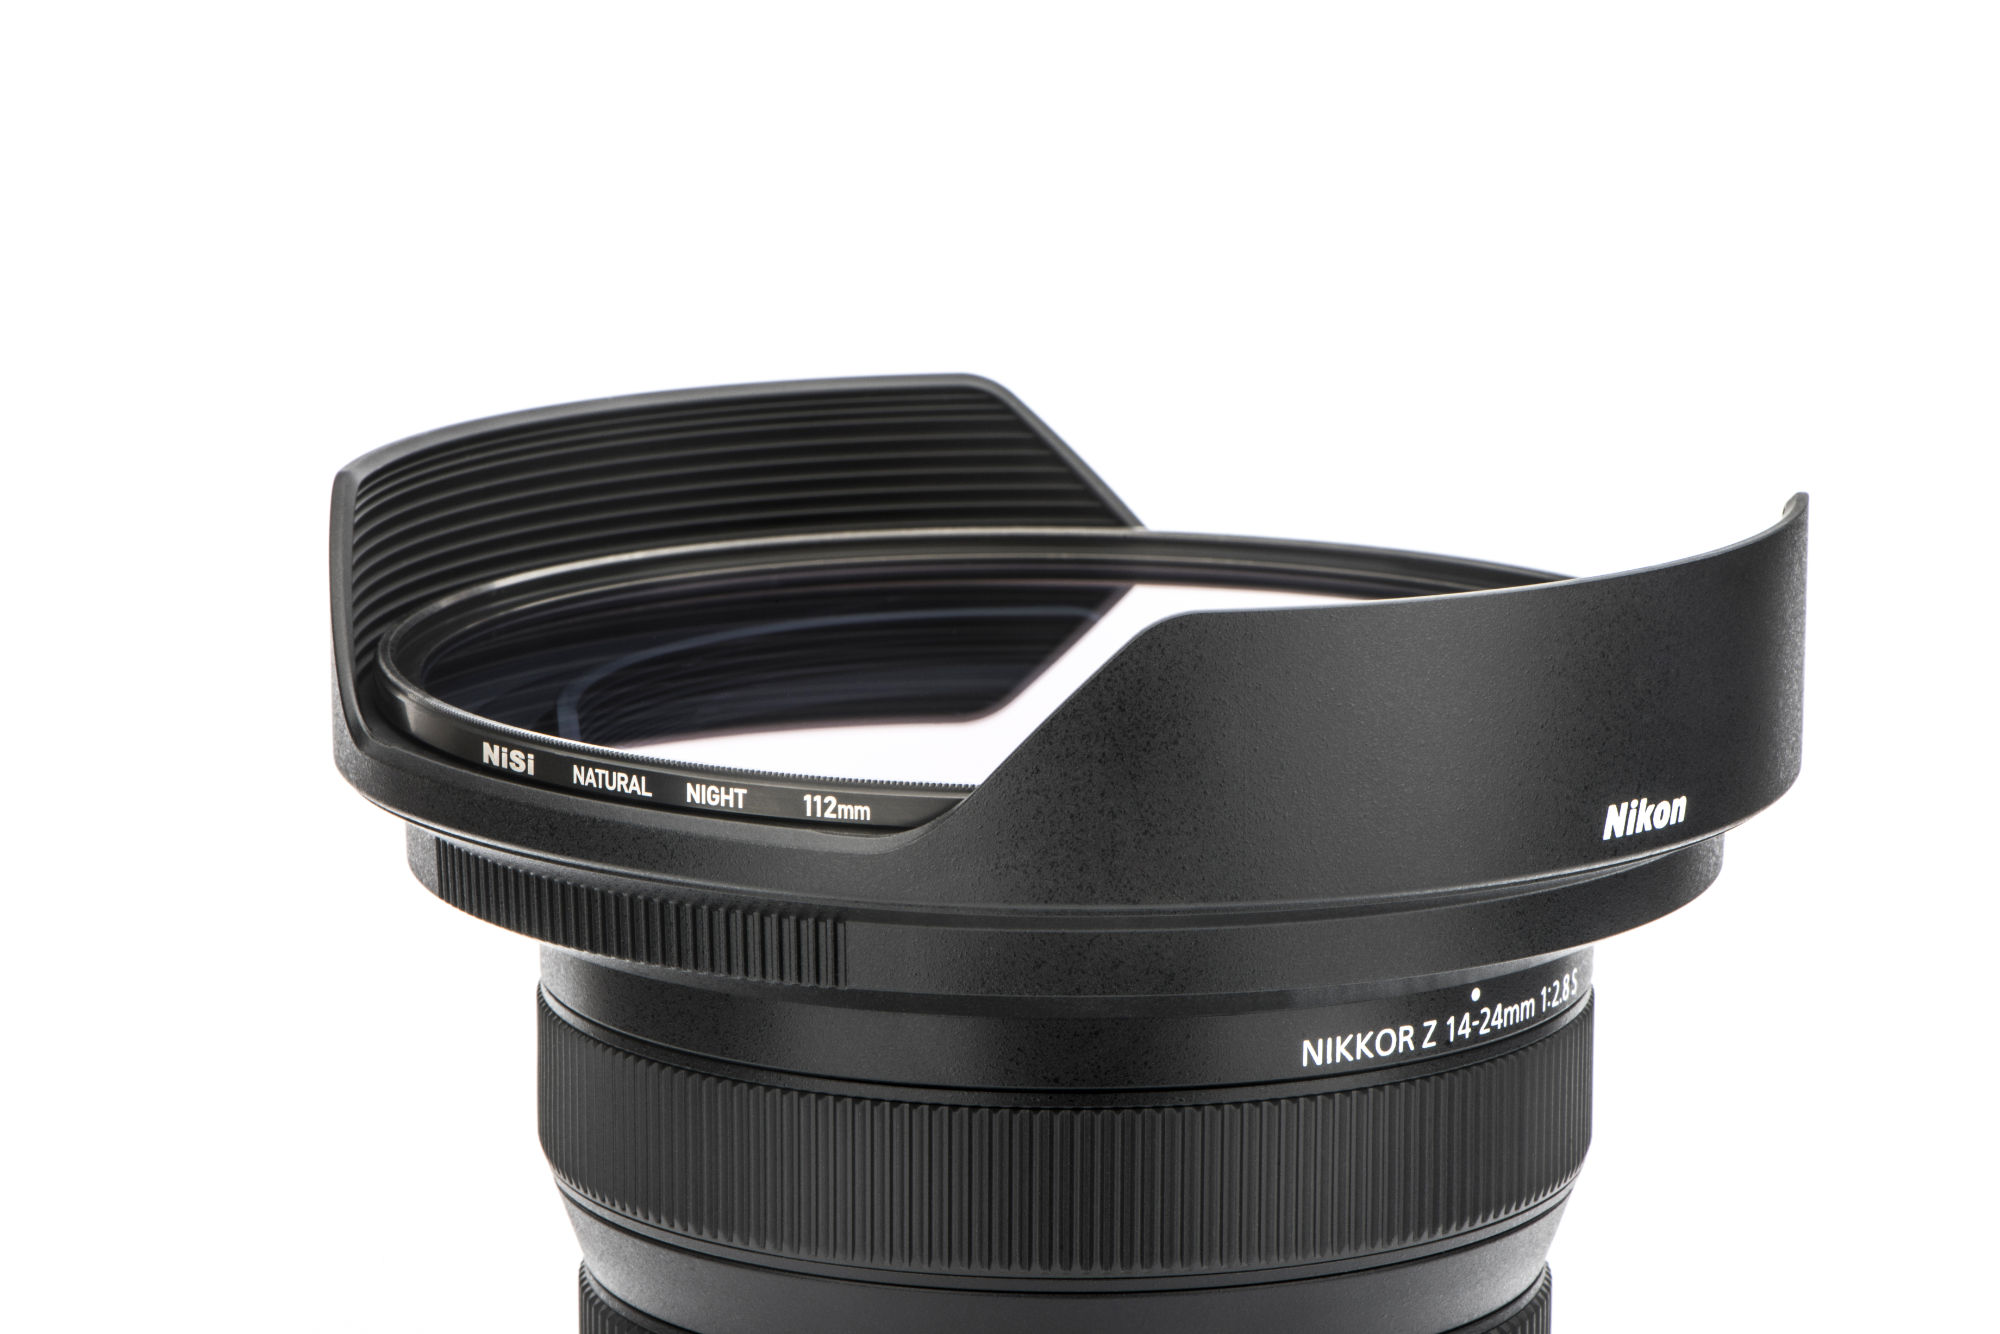 NiSi 112mm Natural Night Filter for Nikon Z 14-24 mm f2.8 S 